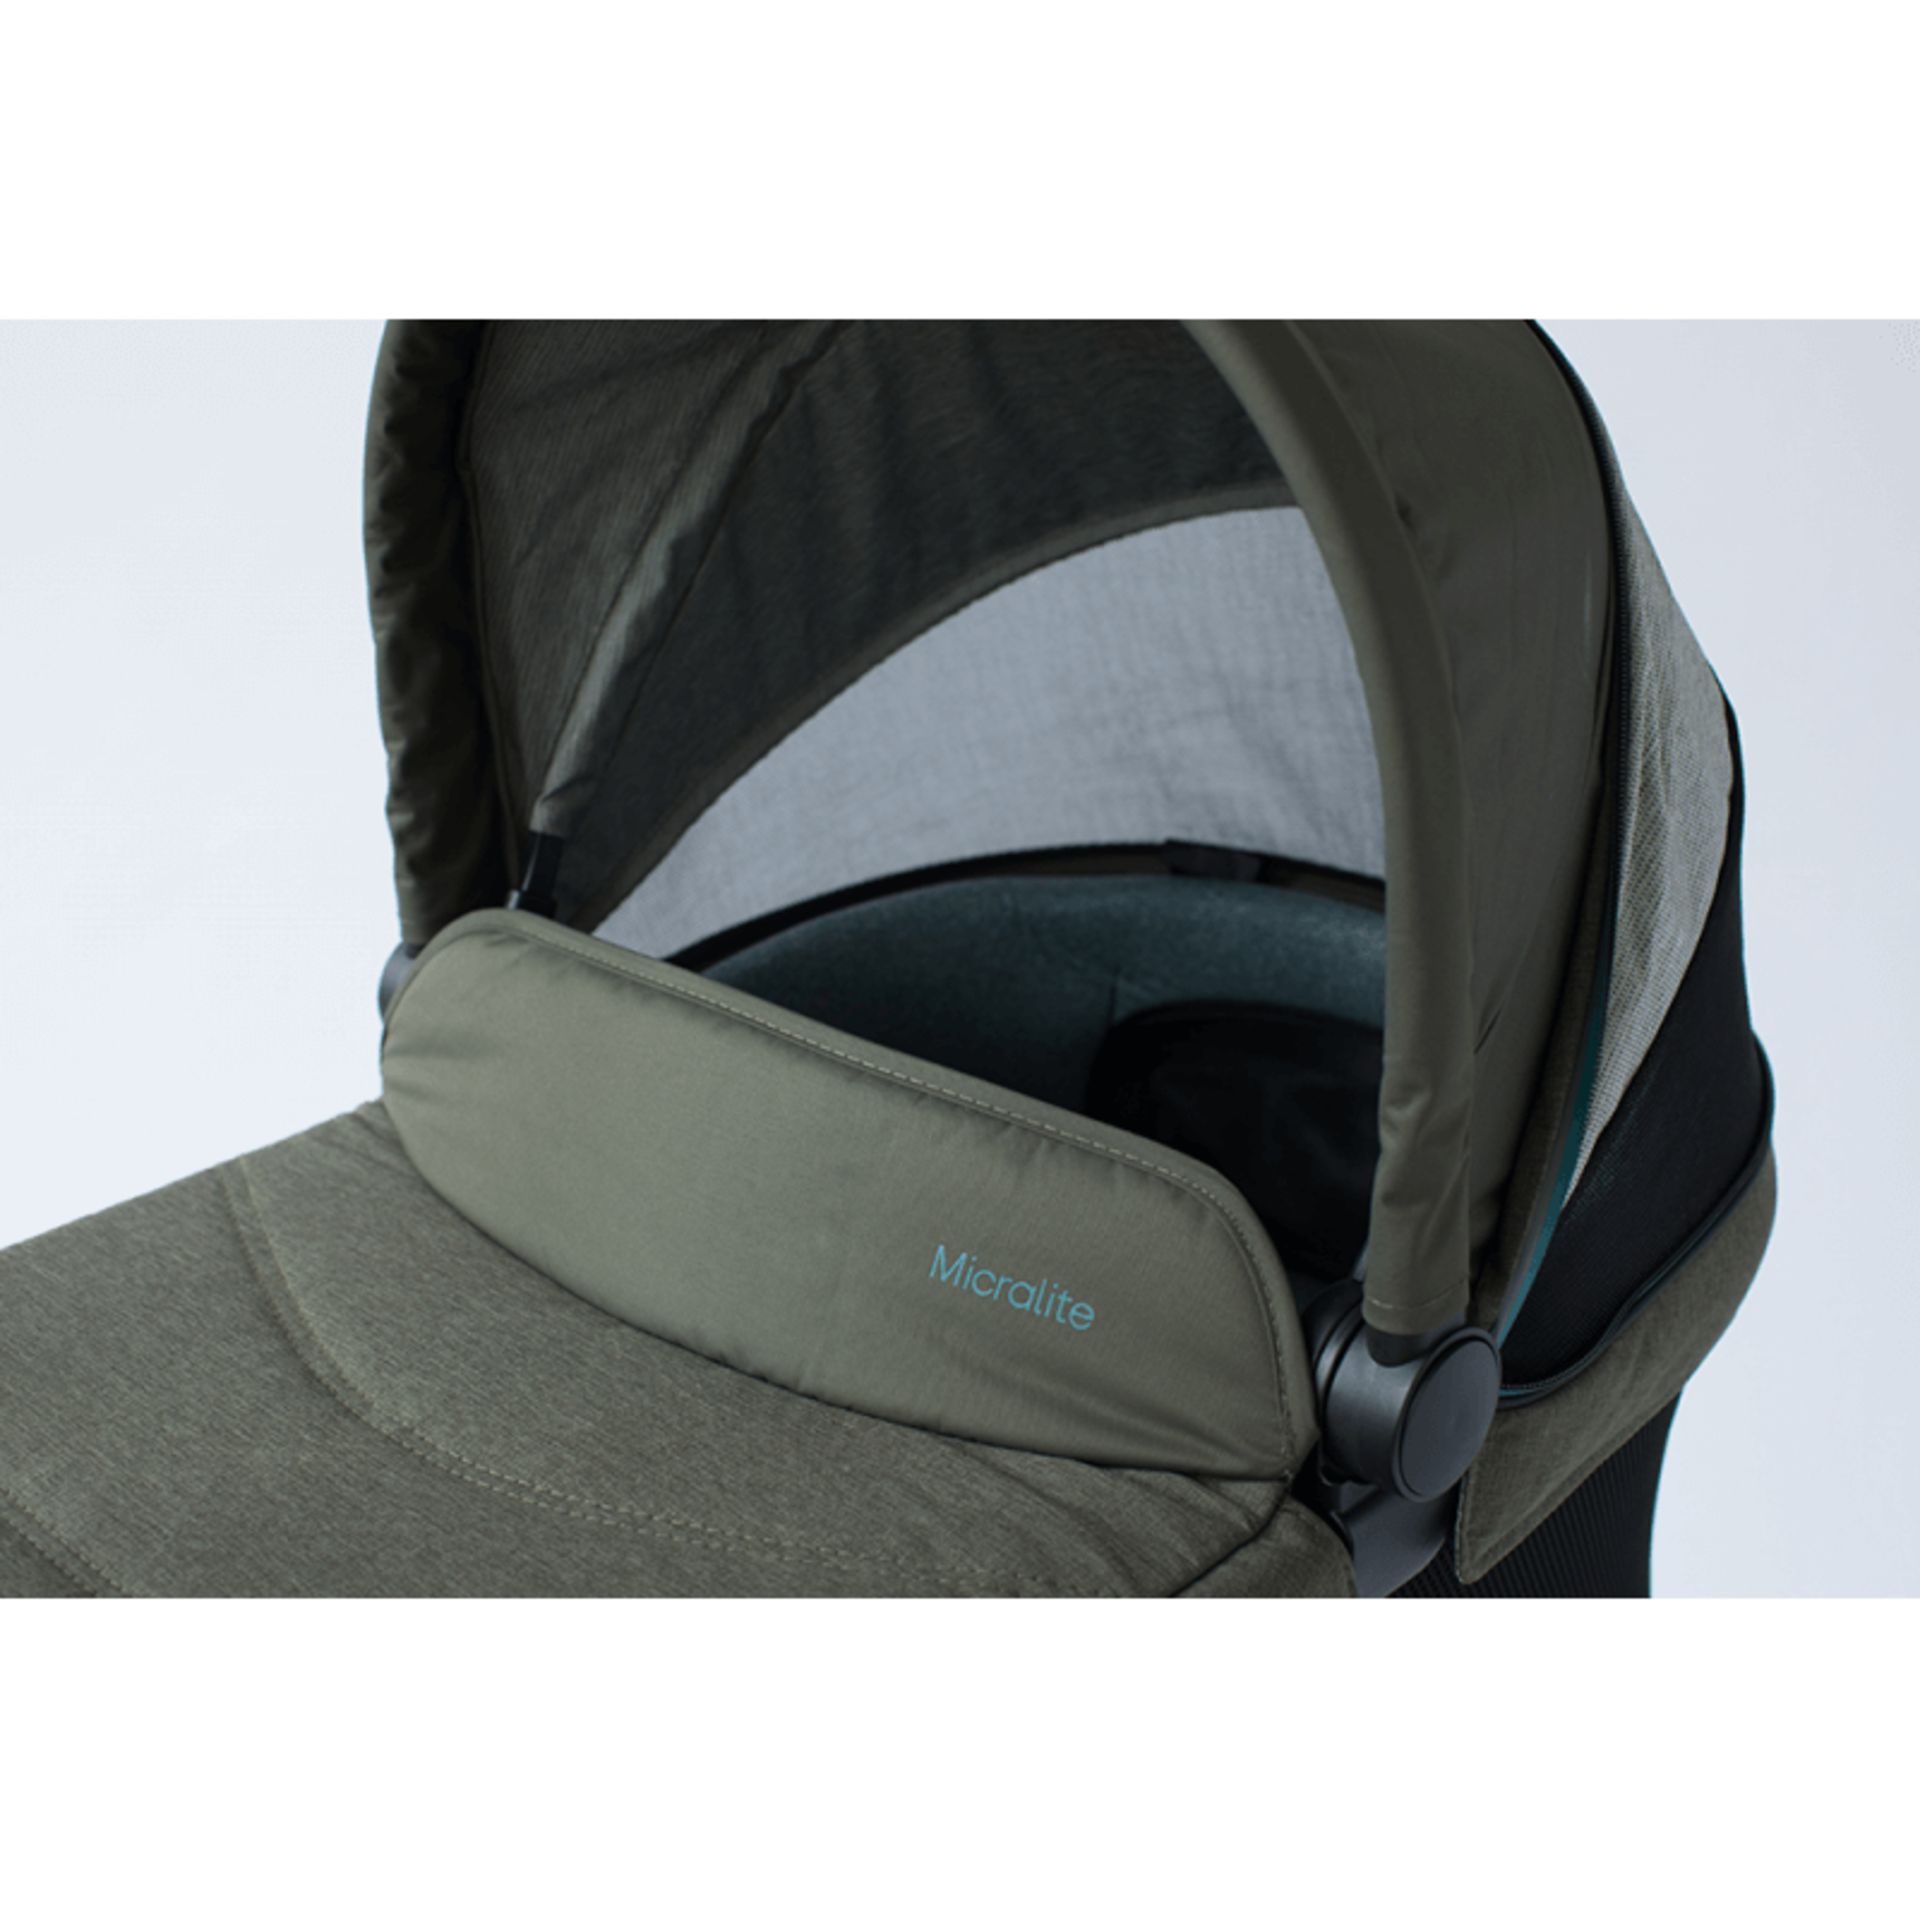 New & Boxed Micralite by Silver Cross Carrycot – Evergreen. RRP £230. The Micralite carrycot is - Image 3 of 3